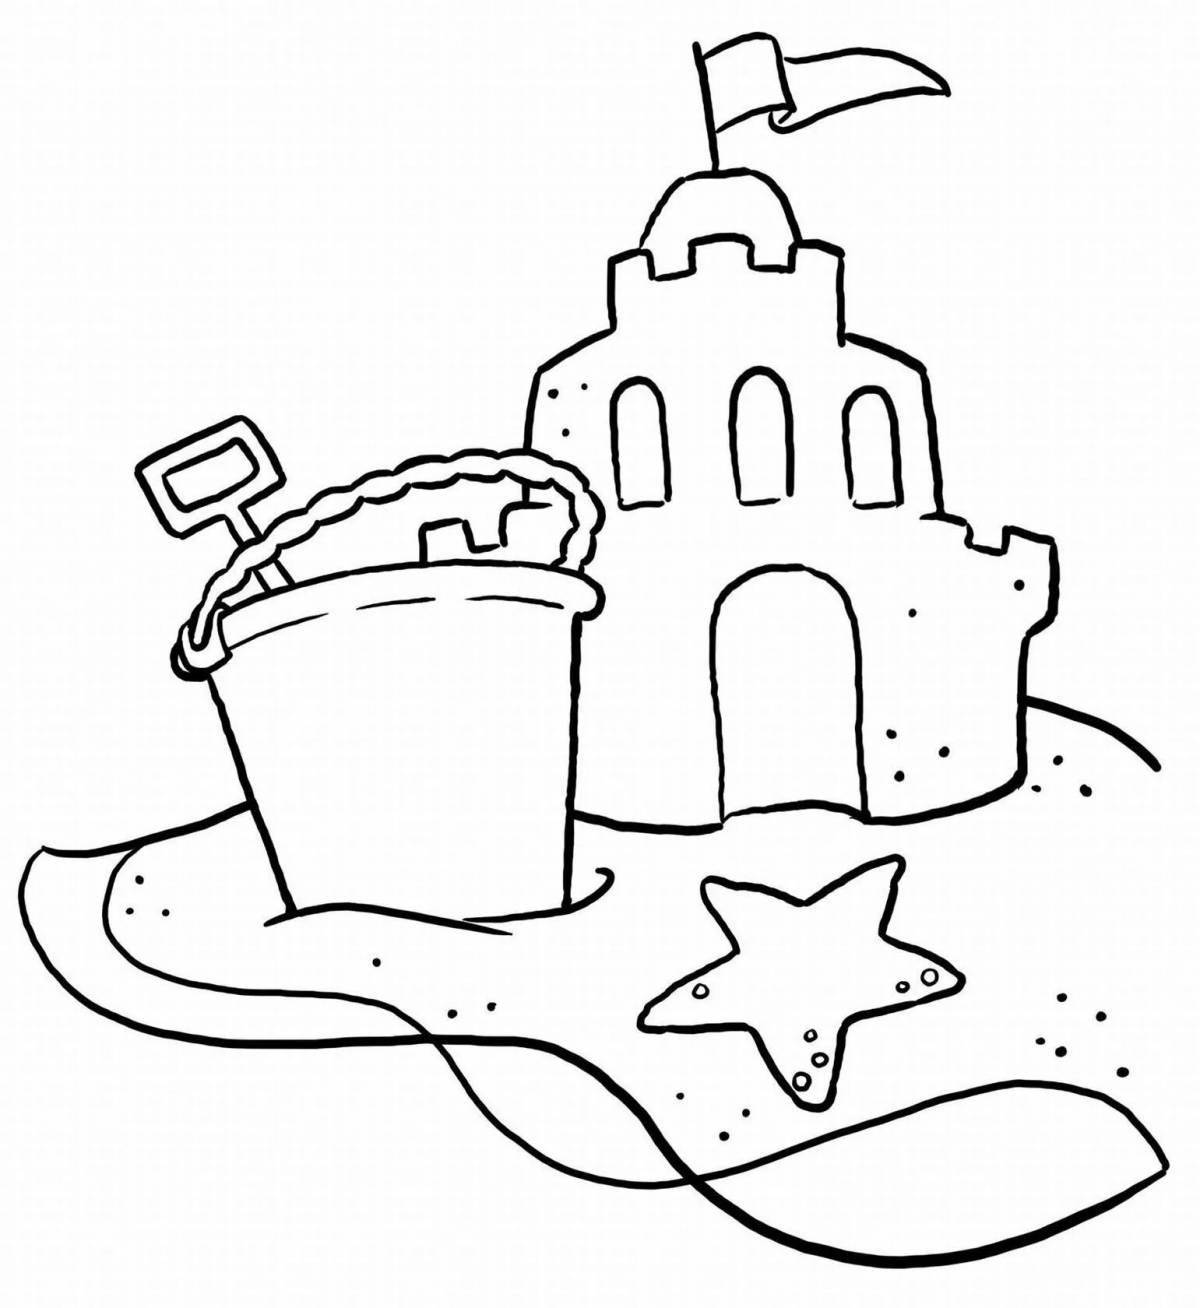 Inspirational sand game coloring book